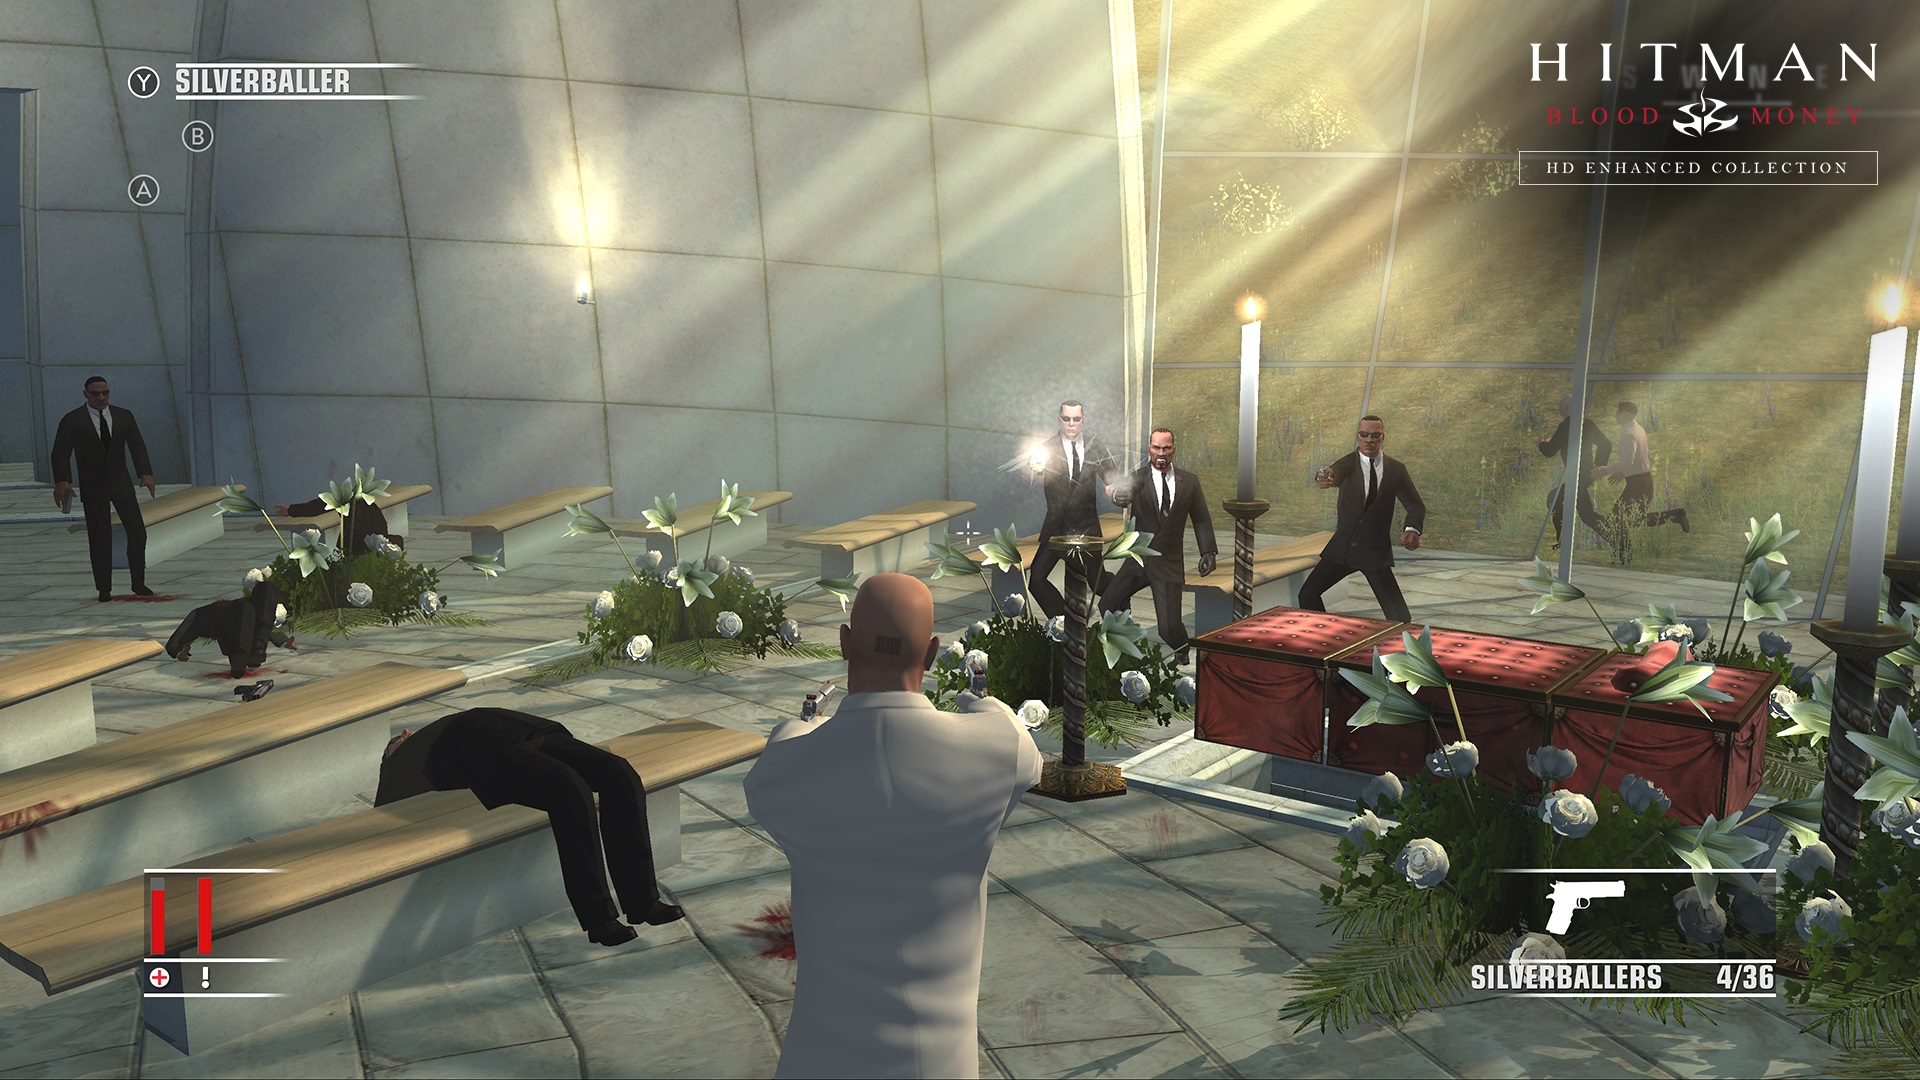 Hitman HD Enhanced Collection Was Developed with Help From Mipumi